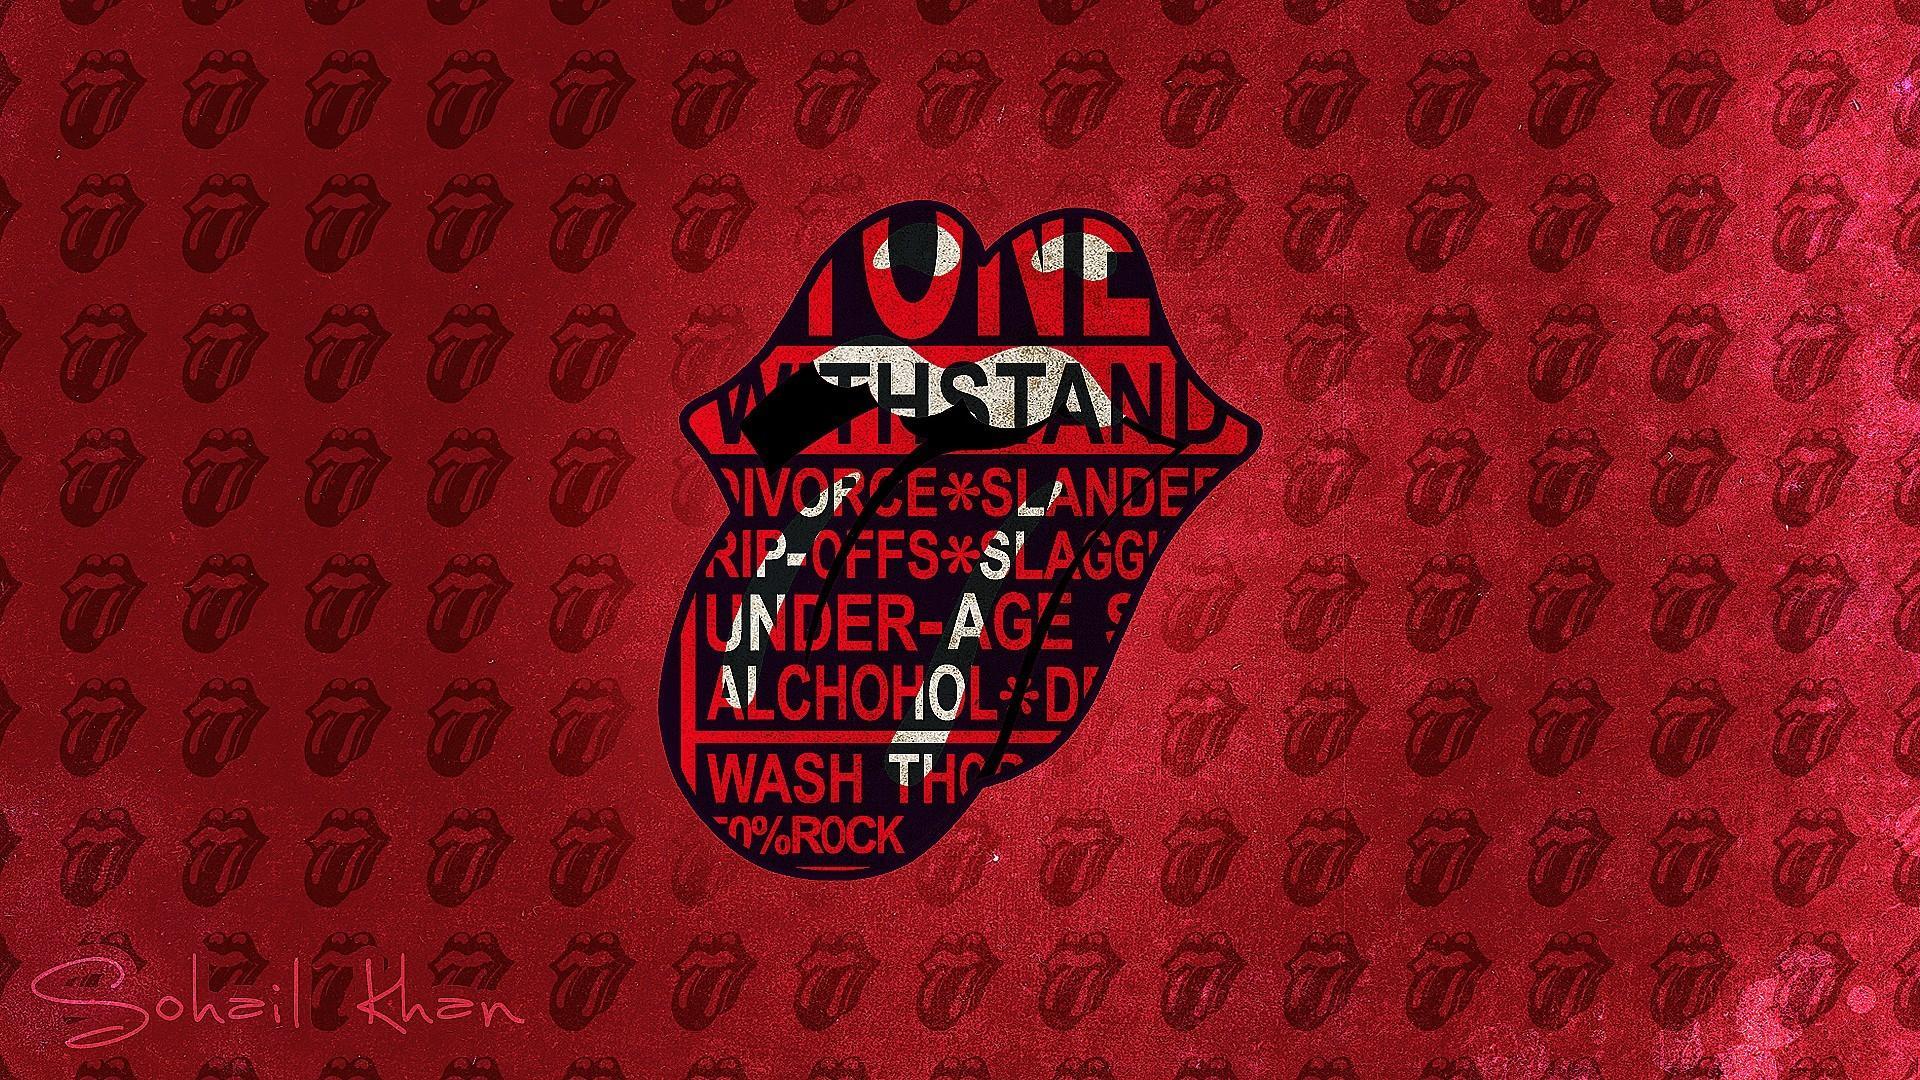 Rock band rolling stones the music tongue wallpaper